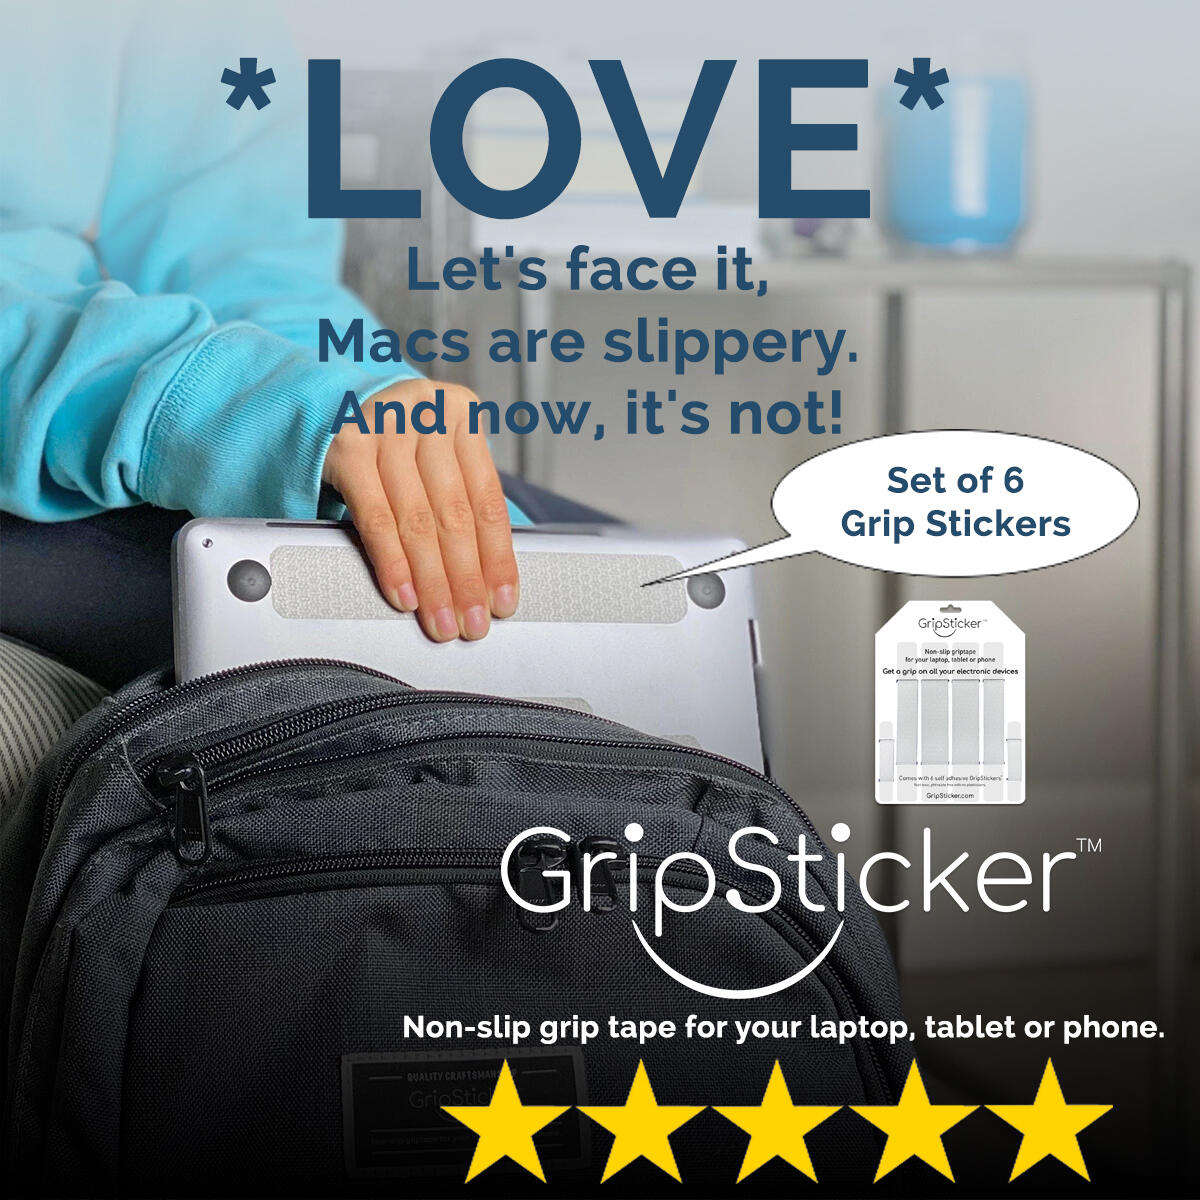 Grip tape for your Laptop, Tablet or Phone - Grip Sticker